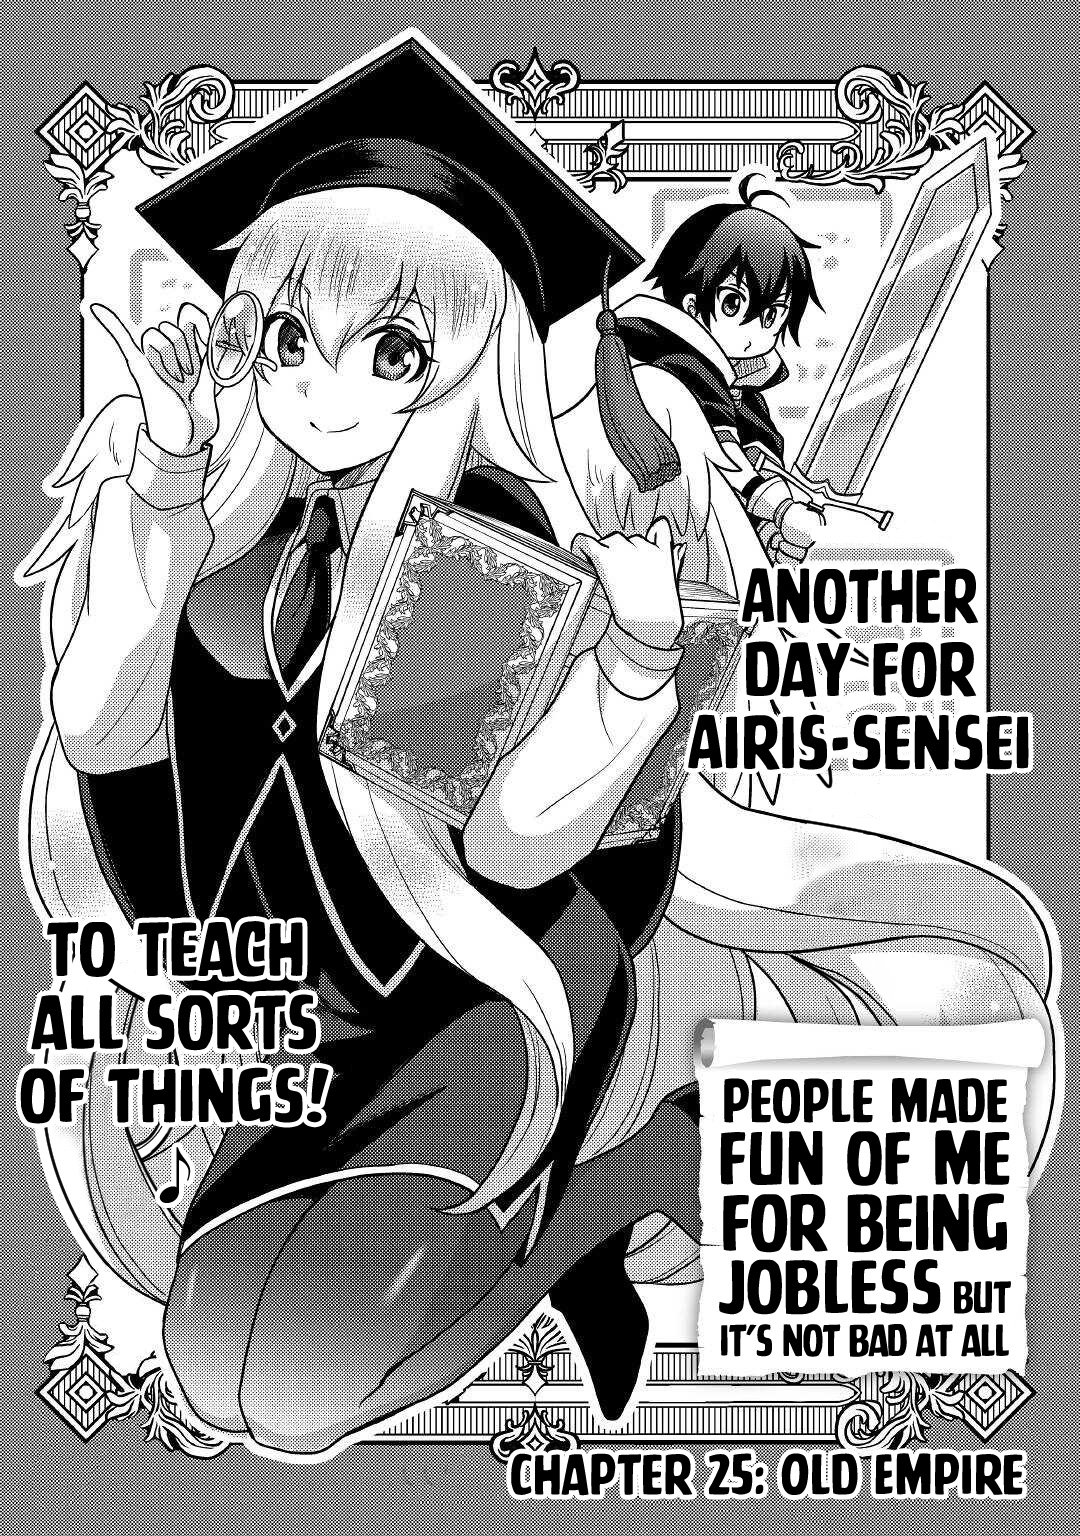 Read People Made Fun of Me for Being Jobless but Its Not Bad at All Manga  English [New Chapters] Online Free - MangaClash